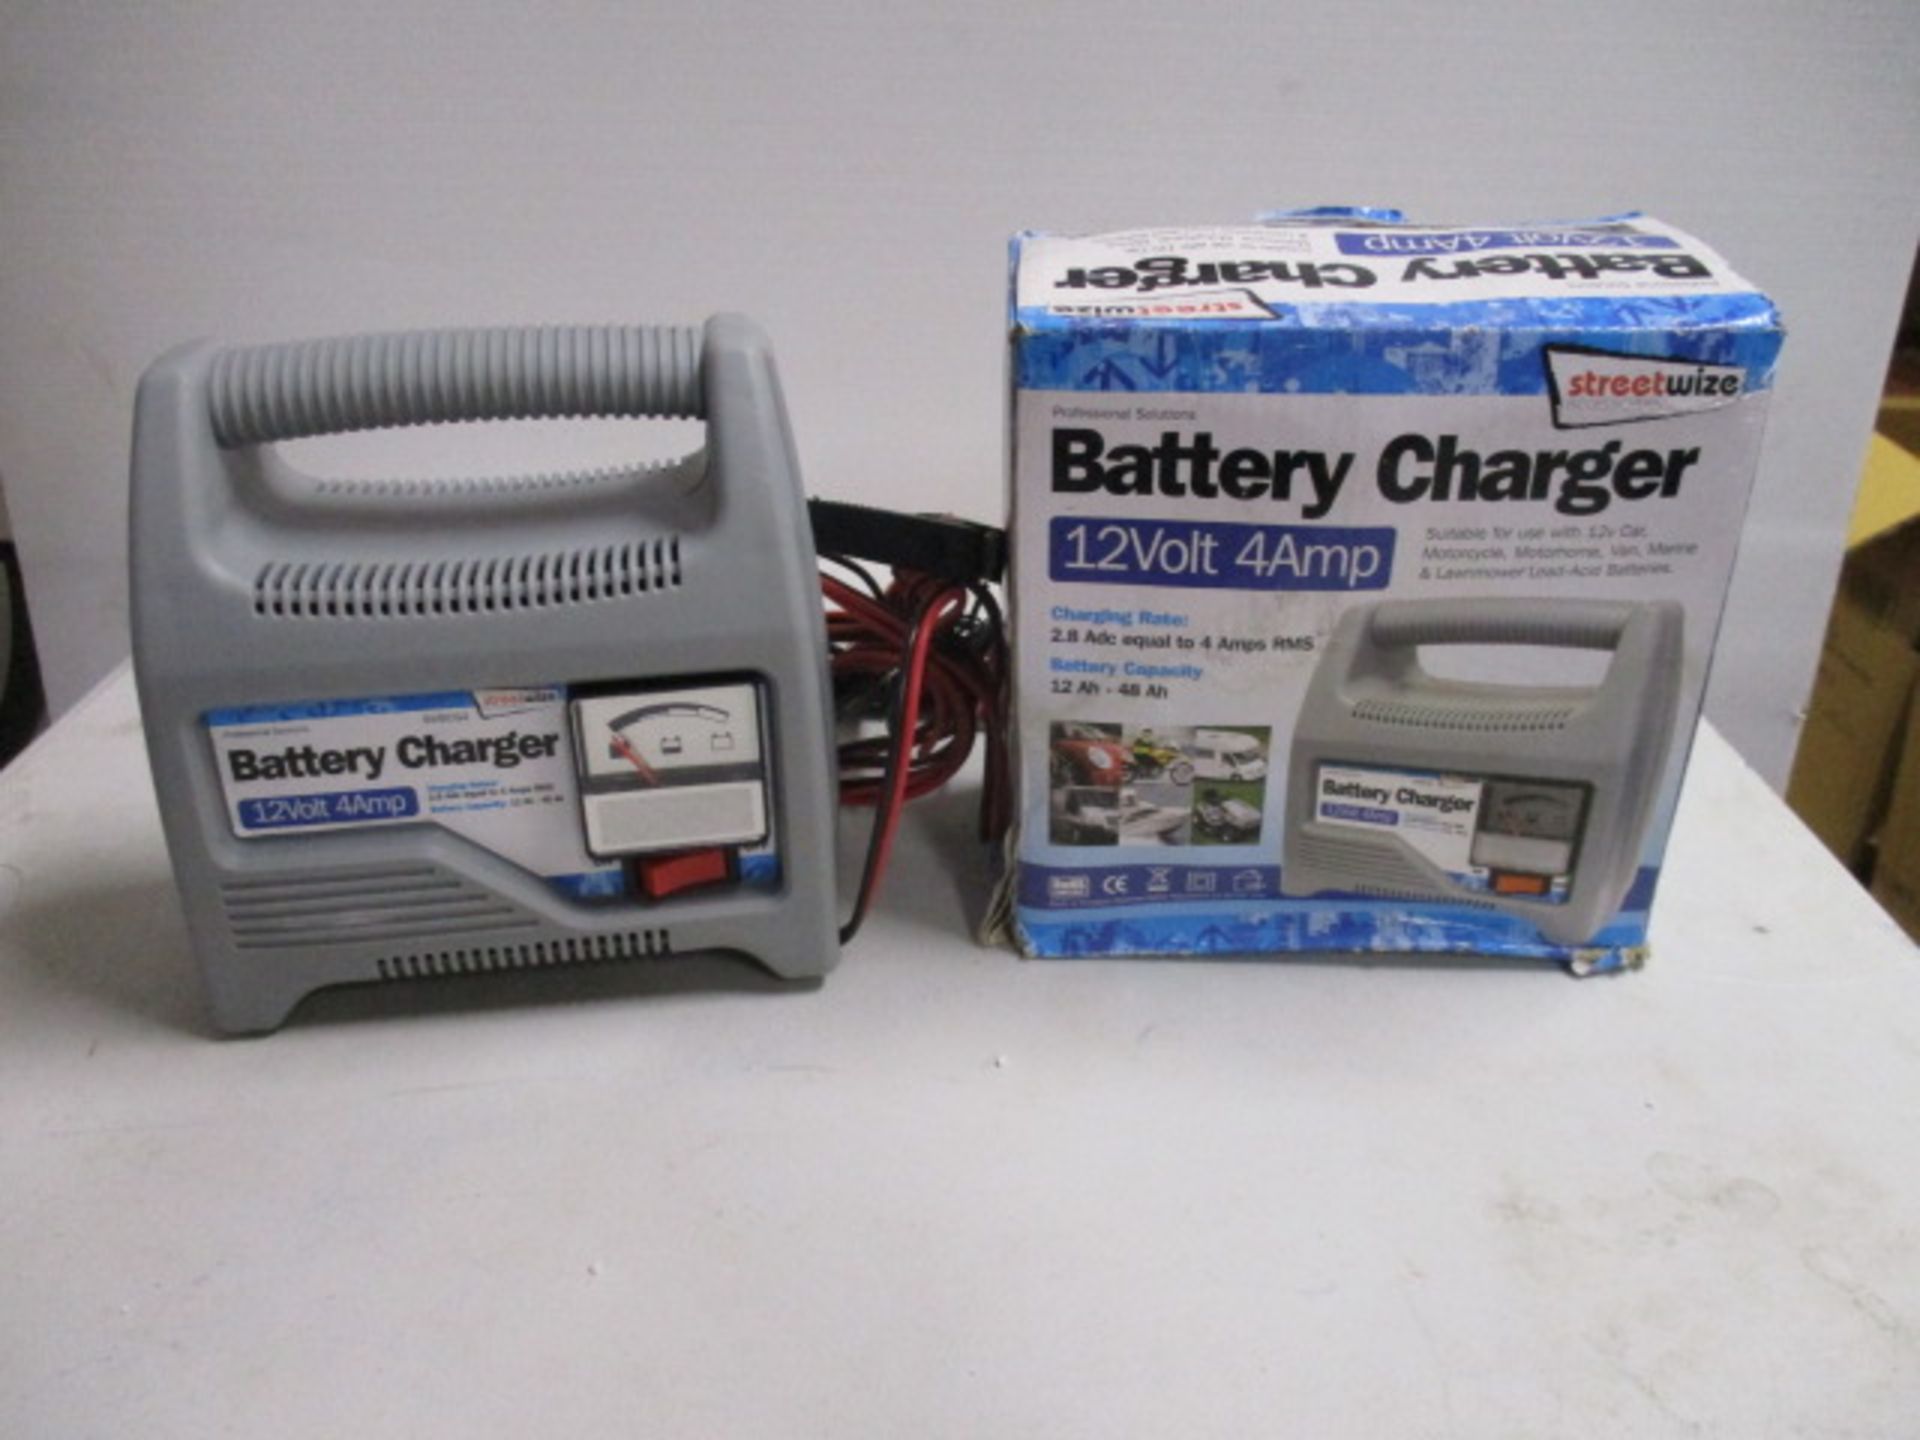 Brand new Streetwize 12V 4 Amp battery charger